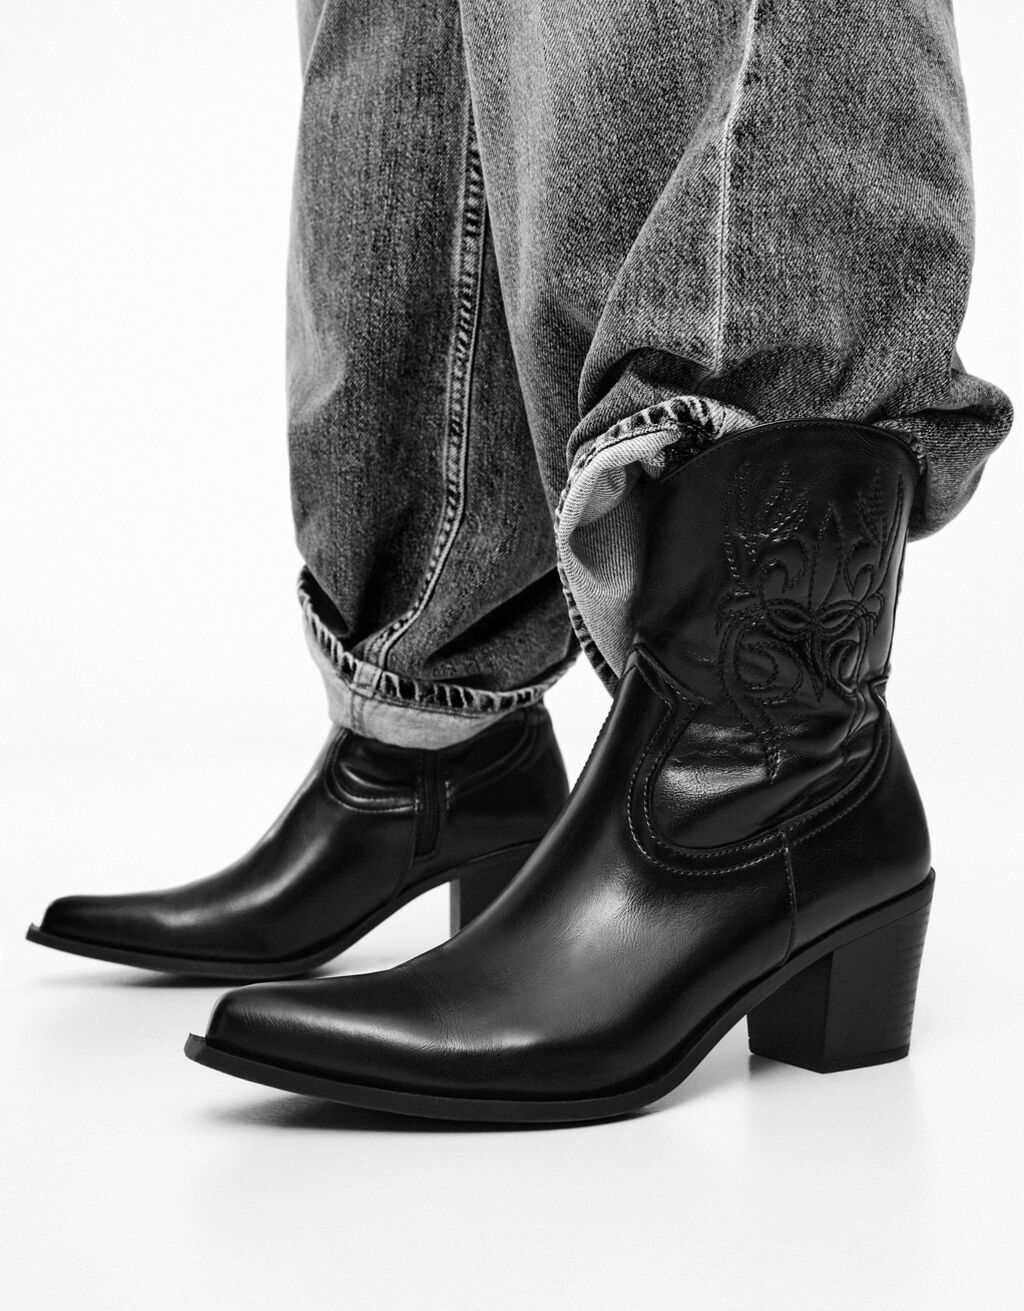 Cowboy high-heel ankle boots